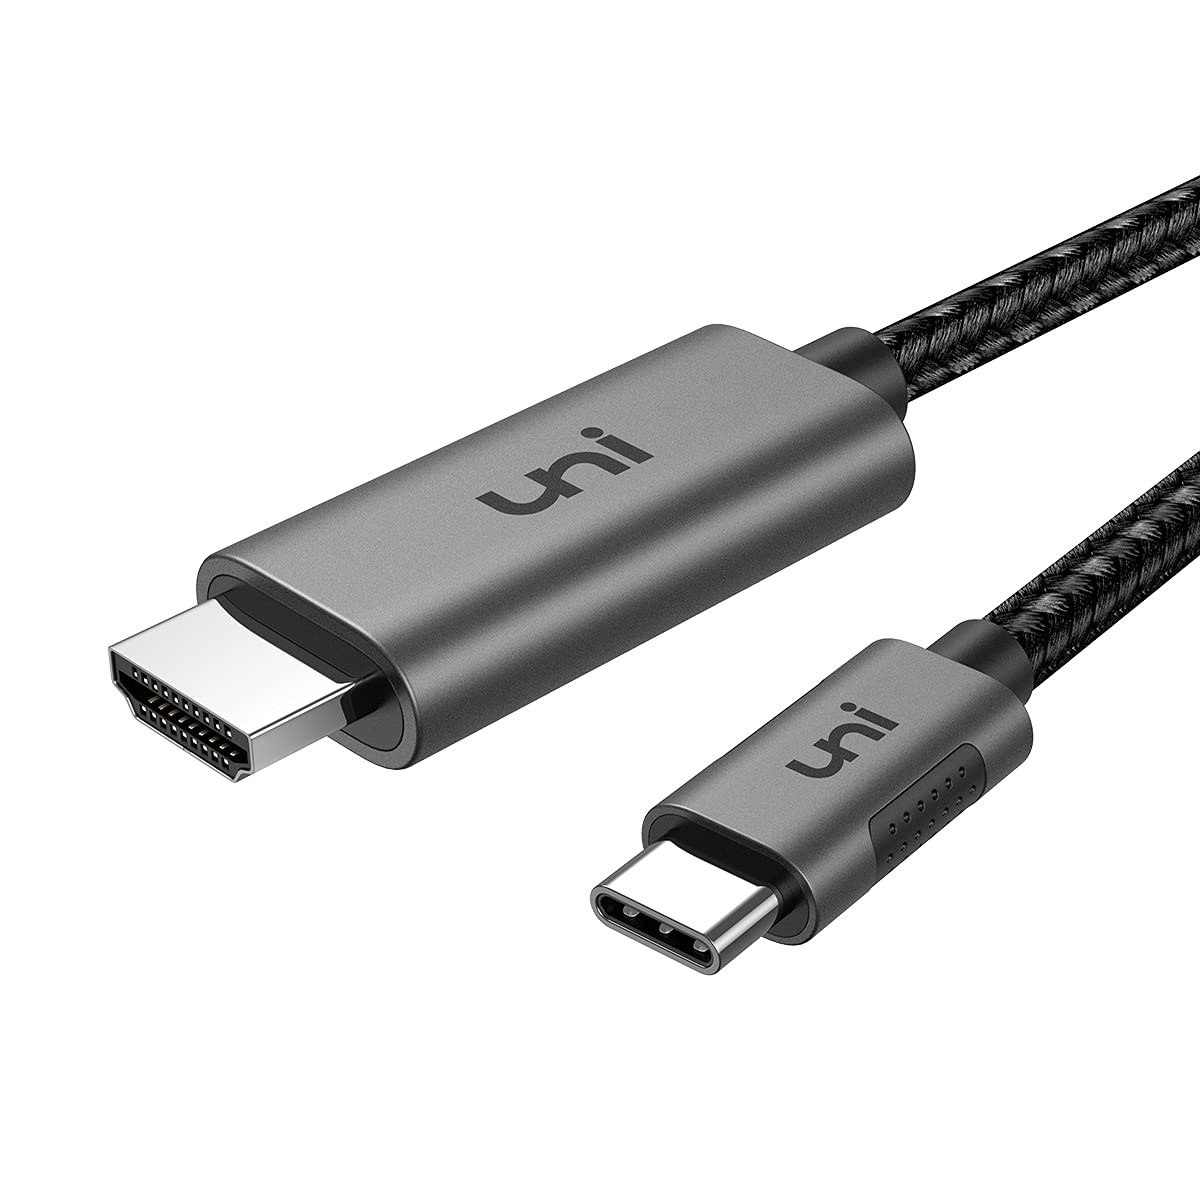 USB C to HDMI Cable for Home Office Compatible with MacBook Pro 2020/2019, MacBook Air/iPad Pro 2020, Surface Book 2, Galaxy S20 and More